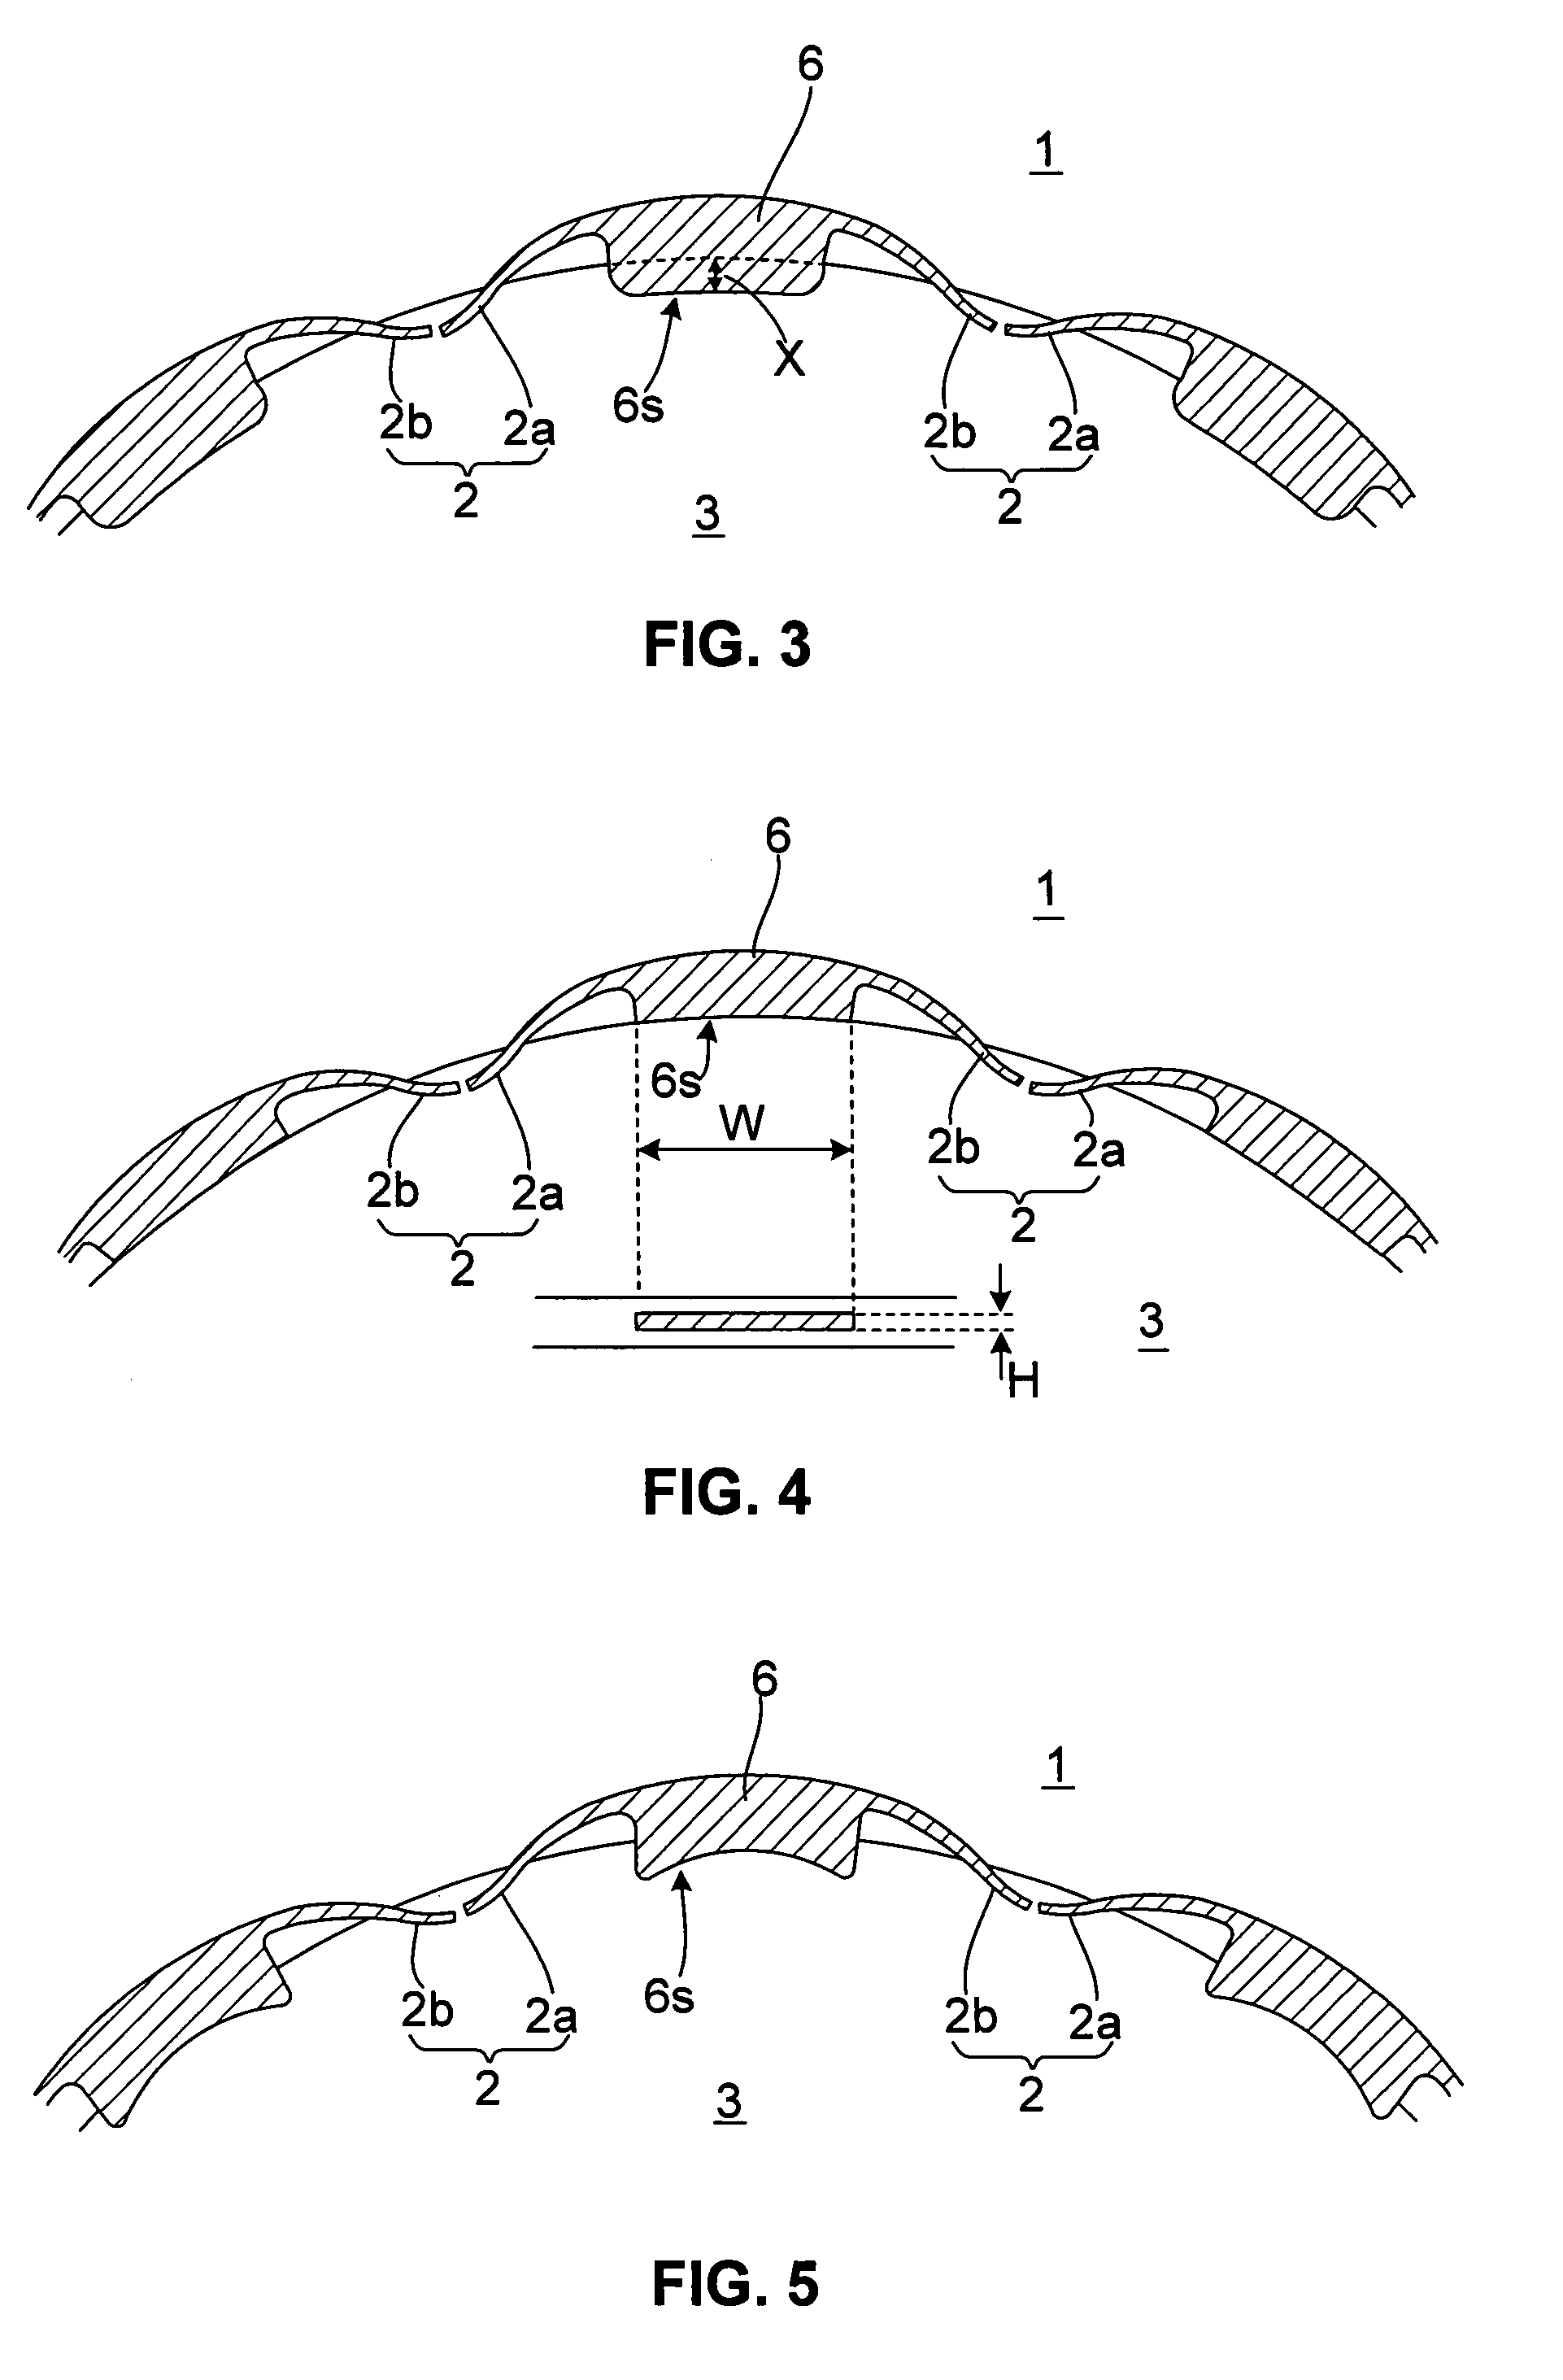 Multipoint ignition device